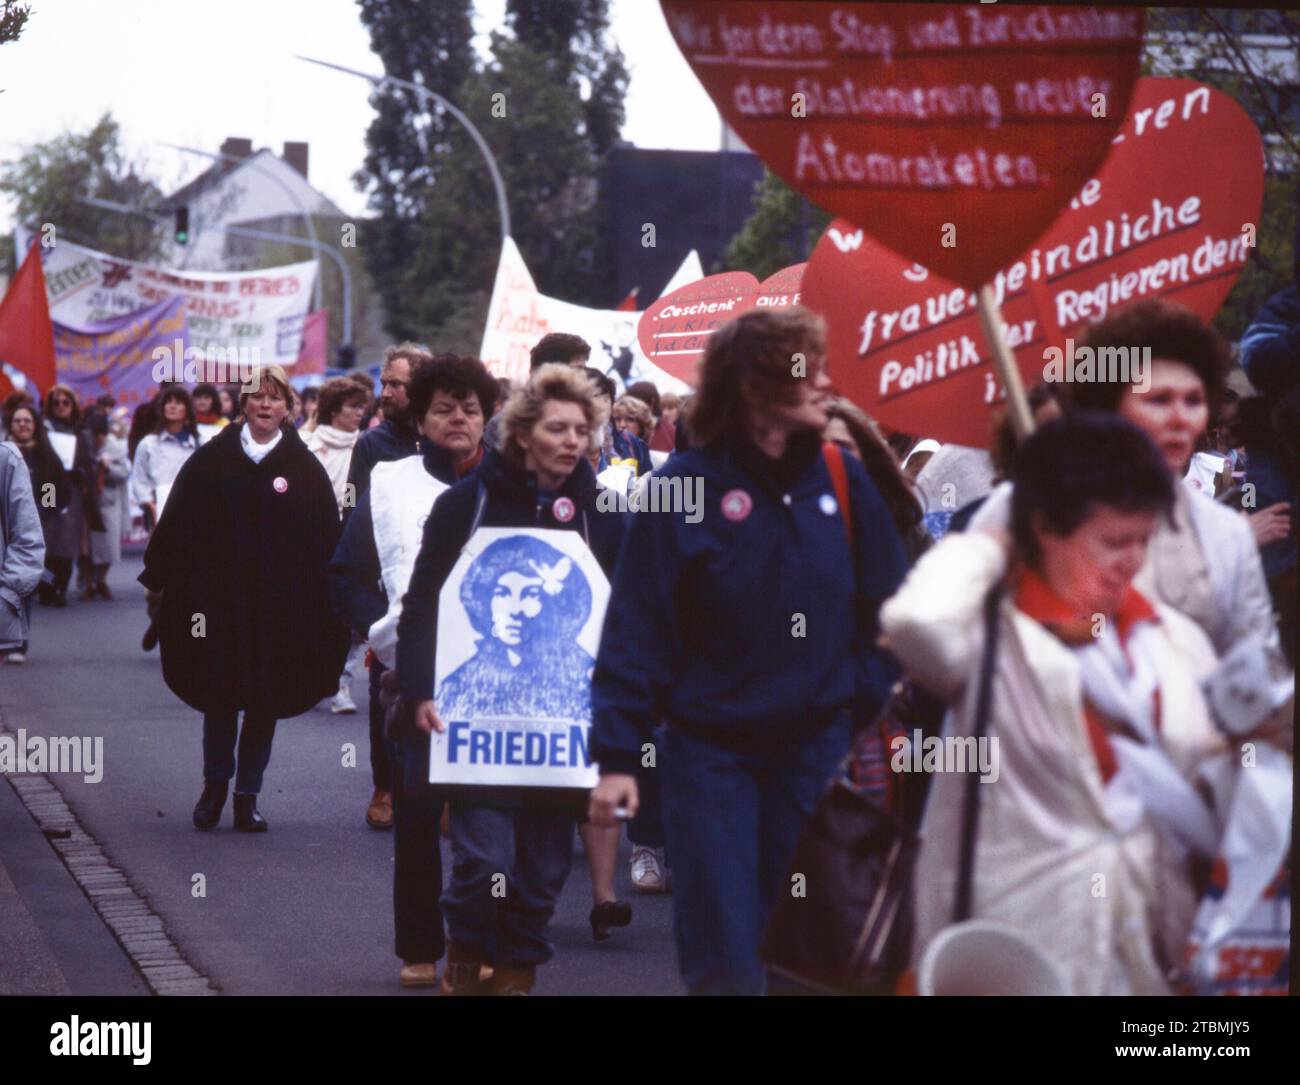 DEU, Germany: The historical slides from the 84-85 r years, Duesseldorf. Women demonstrate for equal rights on International Women's Day on 10 March Stock Photo